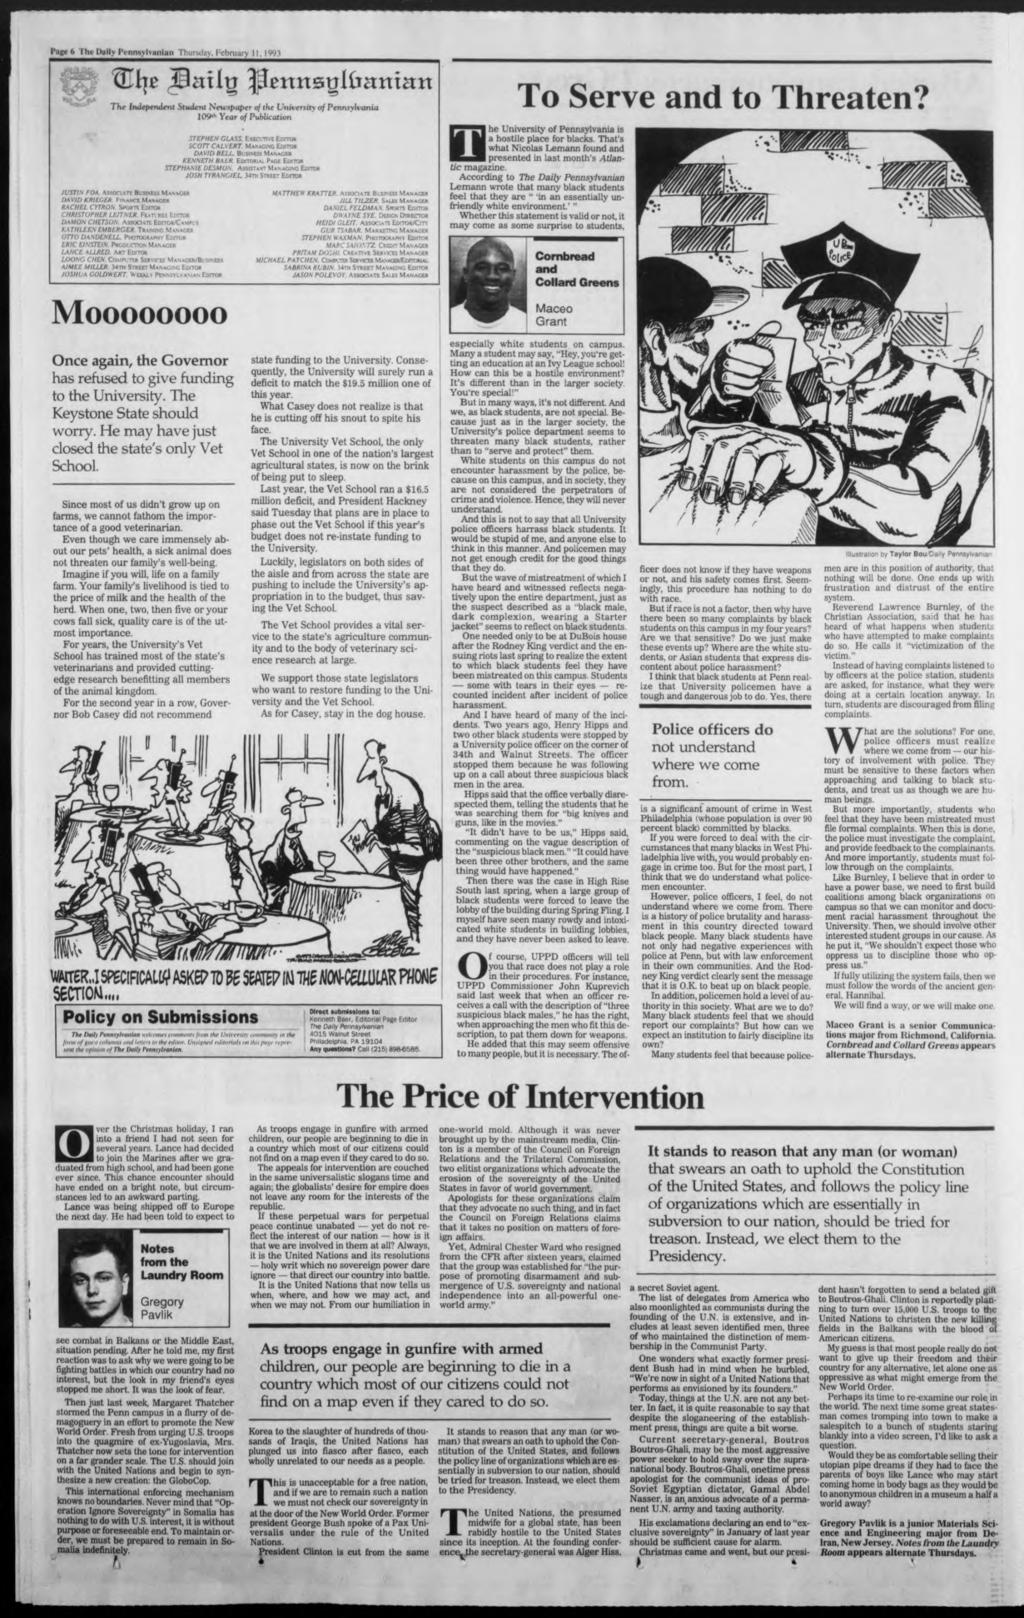 I'Ke 6 I In Dull) lyntyltanlan Thursday. Icbruary II. 1993 Thr Independent Student Sev.spaper of the Unversty of Pennsylvana 109- h Year of Publcaton JUSTIN FOA Awon vrr Bssts Mscu DAVID KRIEGER I '.